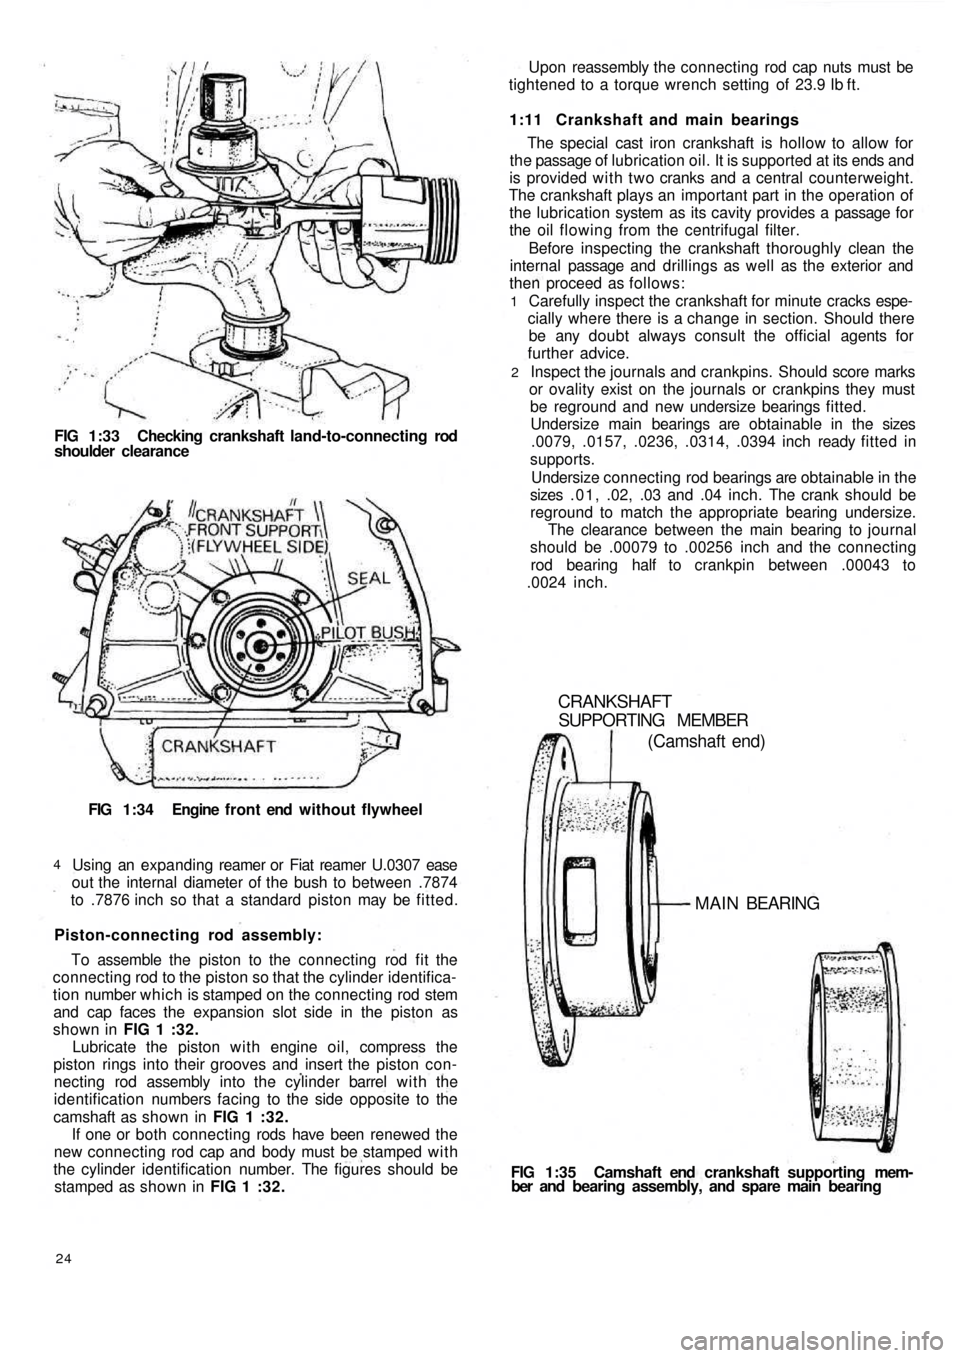 FIAT 500 1965 1.G Workshop Manual FIG 1:33 Checking crankshaft land-to-connecting rod
shoulder clearance
FIG 1:34 Engine  f r o n t  end  without flywheel
Using an expanding reamer or Fiat reamer U.0307 ease
out the internal diameter 